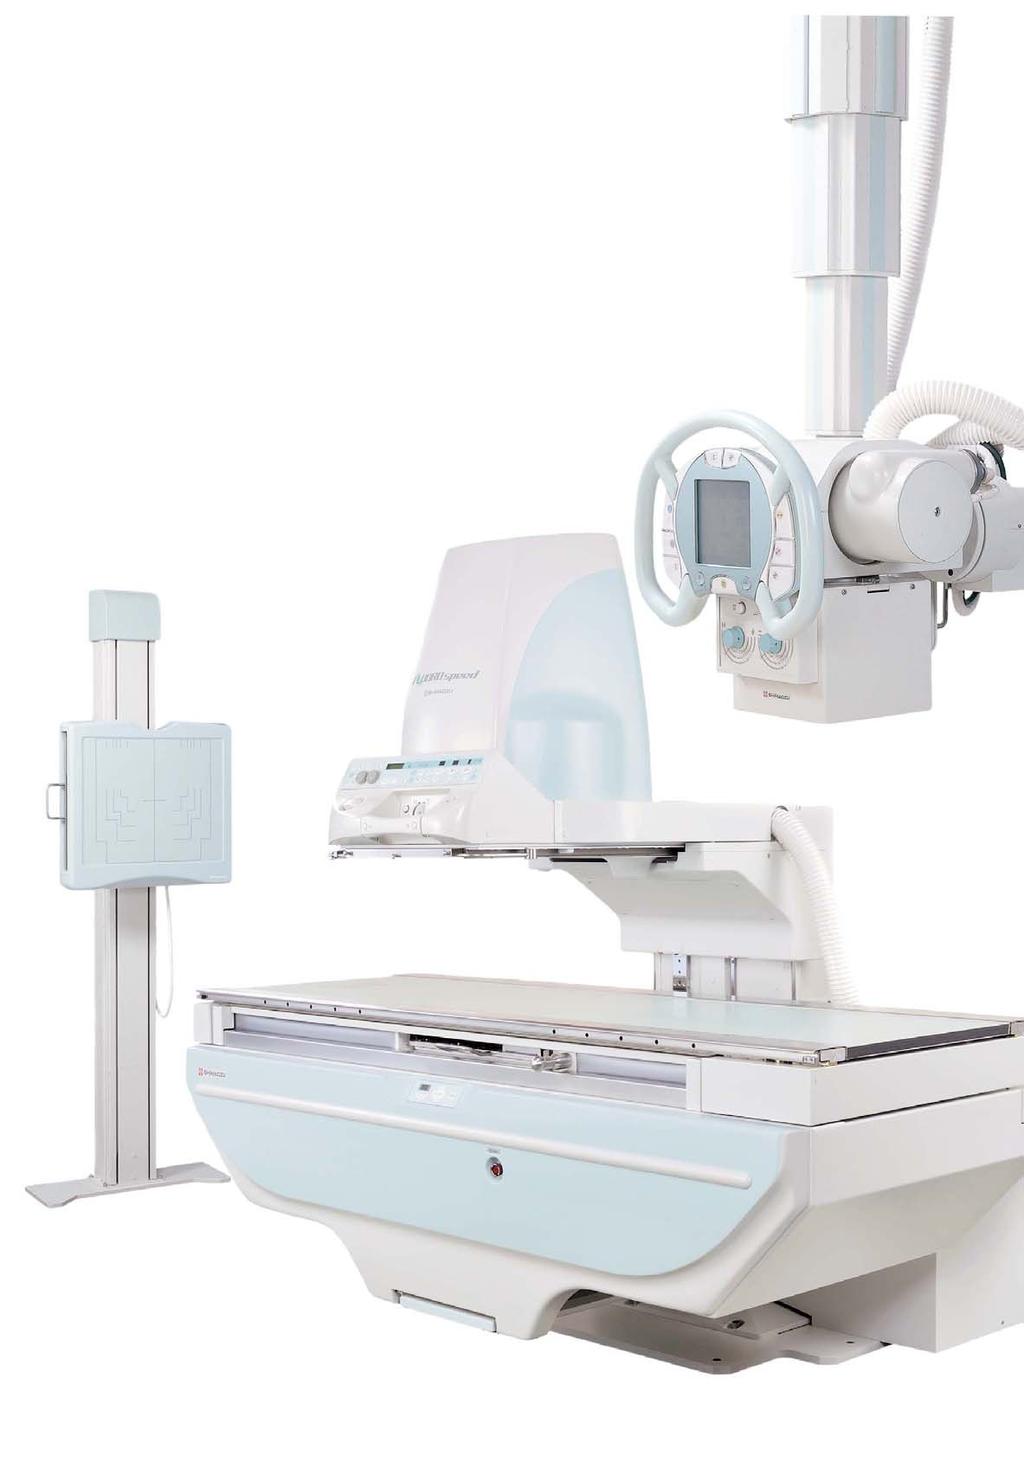 Fully Integrated Design Handles All Regions In combination with the CH-200 ceiling-type X-ray tube support, the FluoroSpeed300 performs all types of